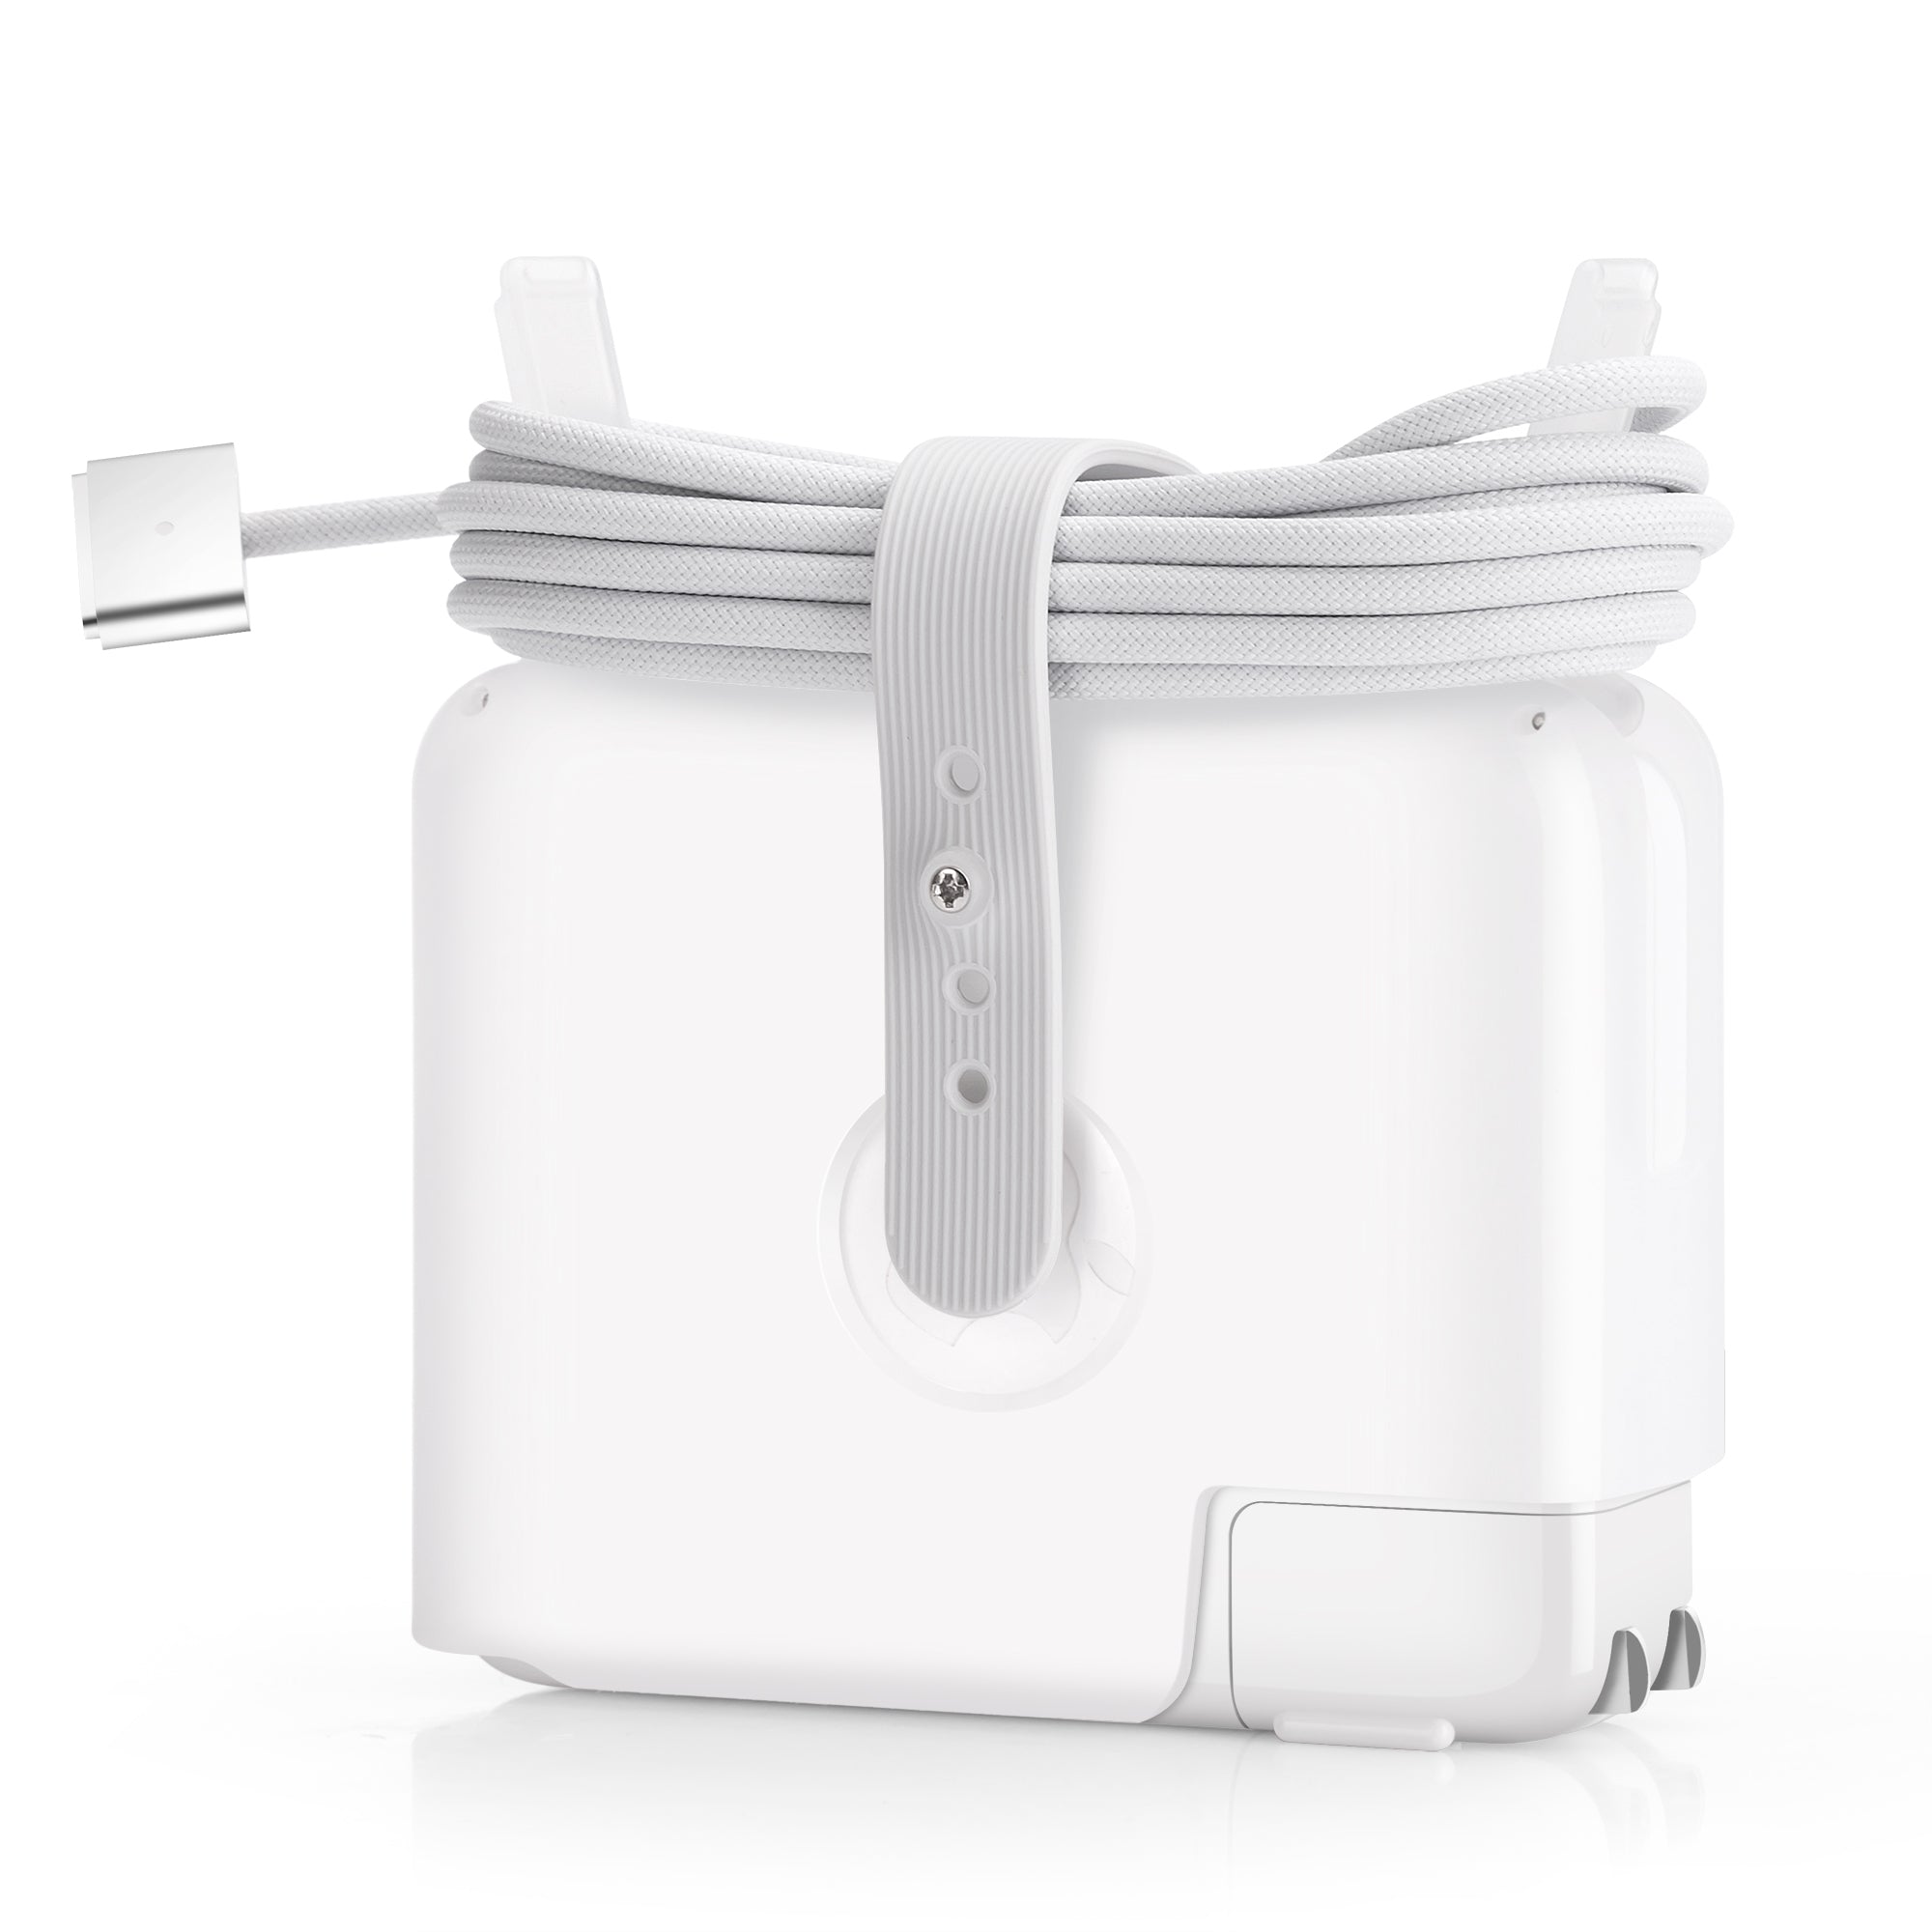 Chargers - Charging Essentials - Mac Accessories - Apple